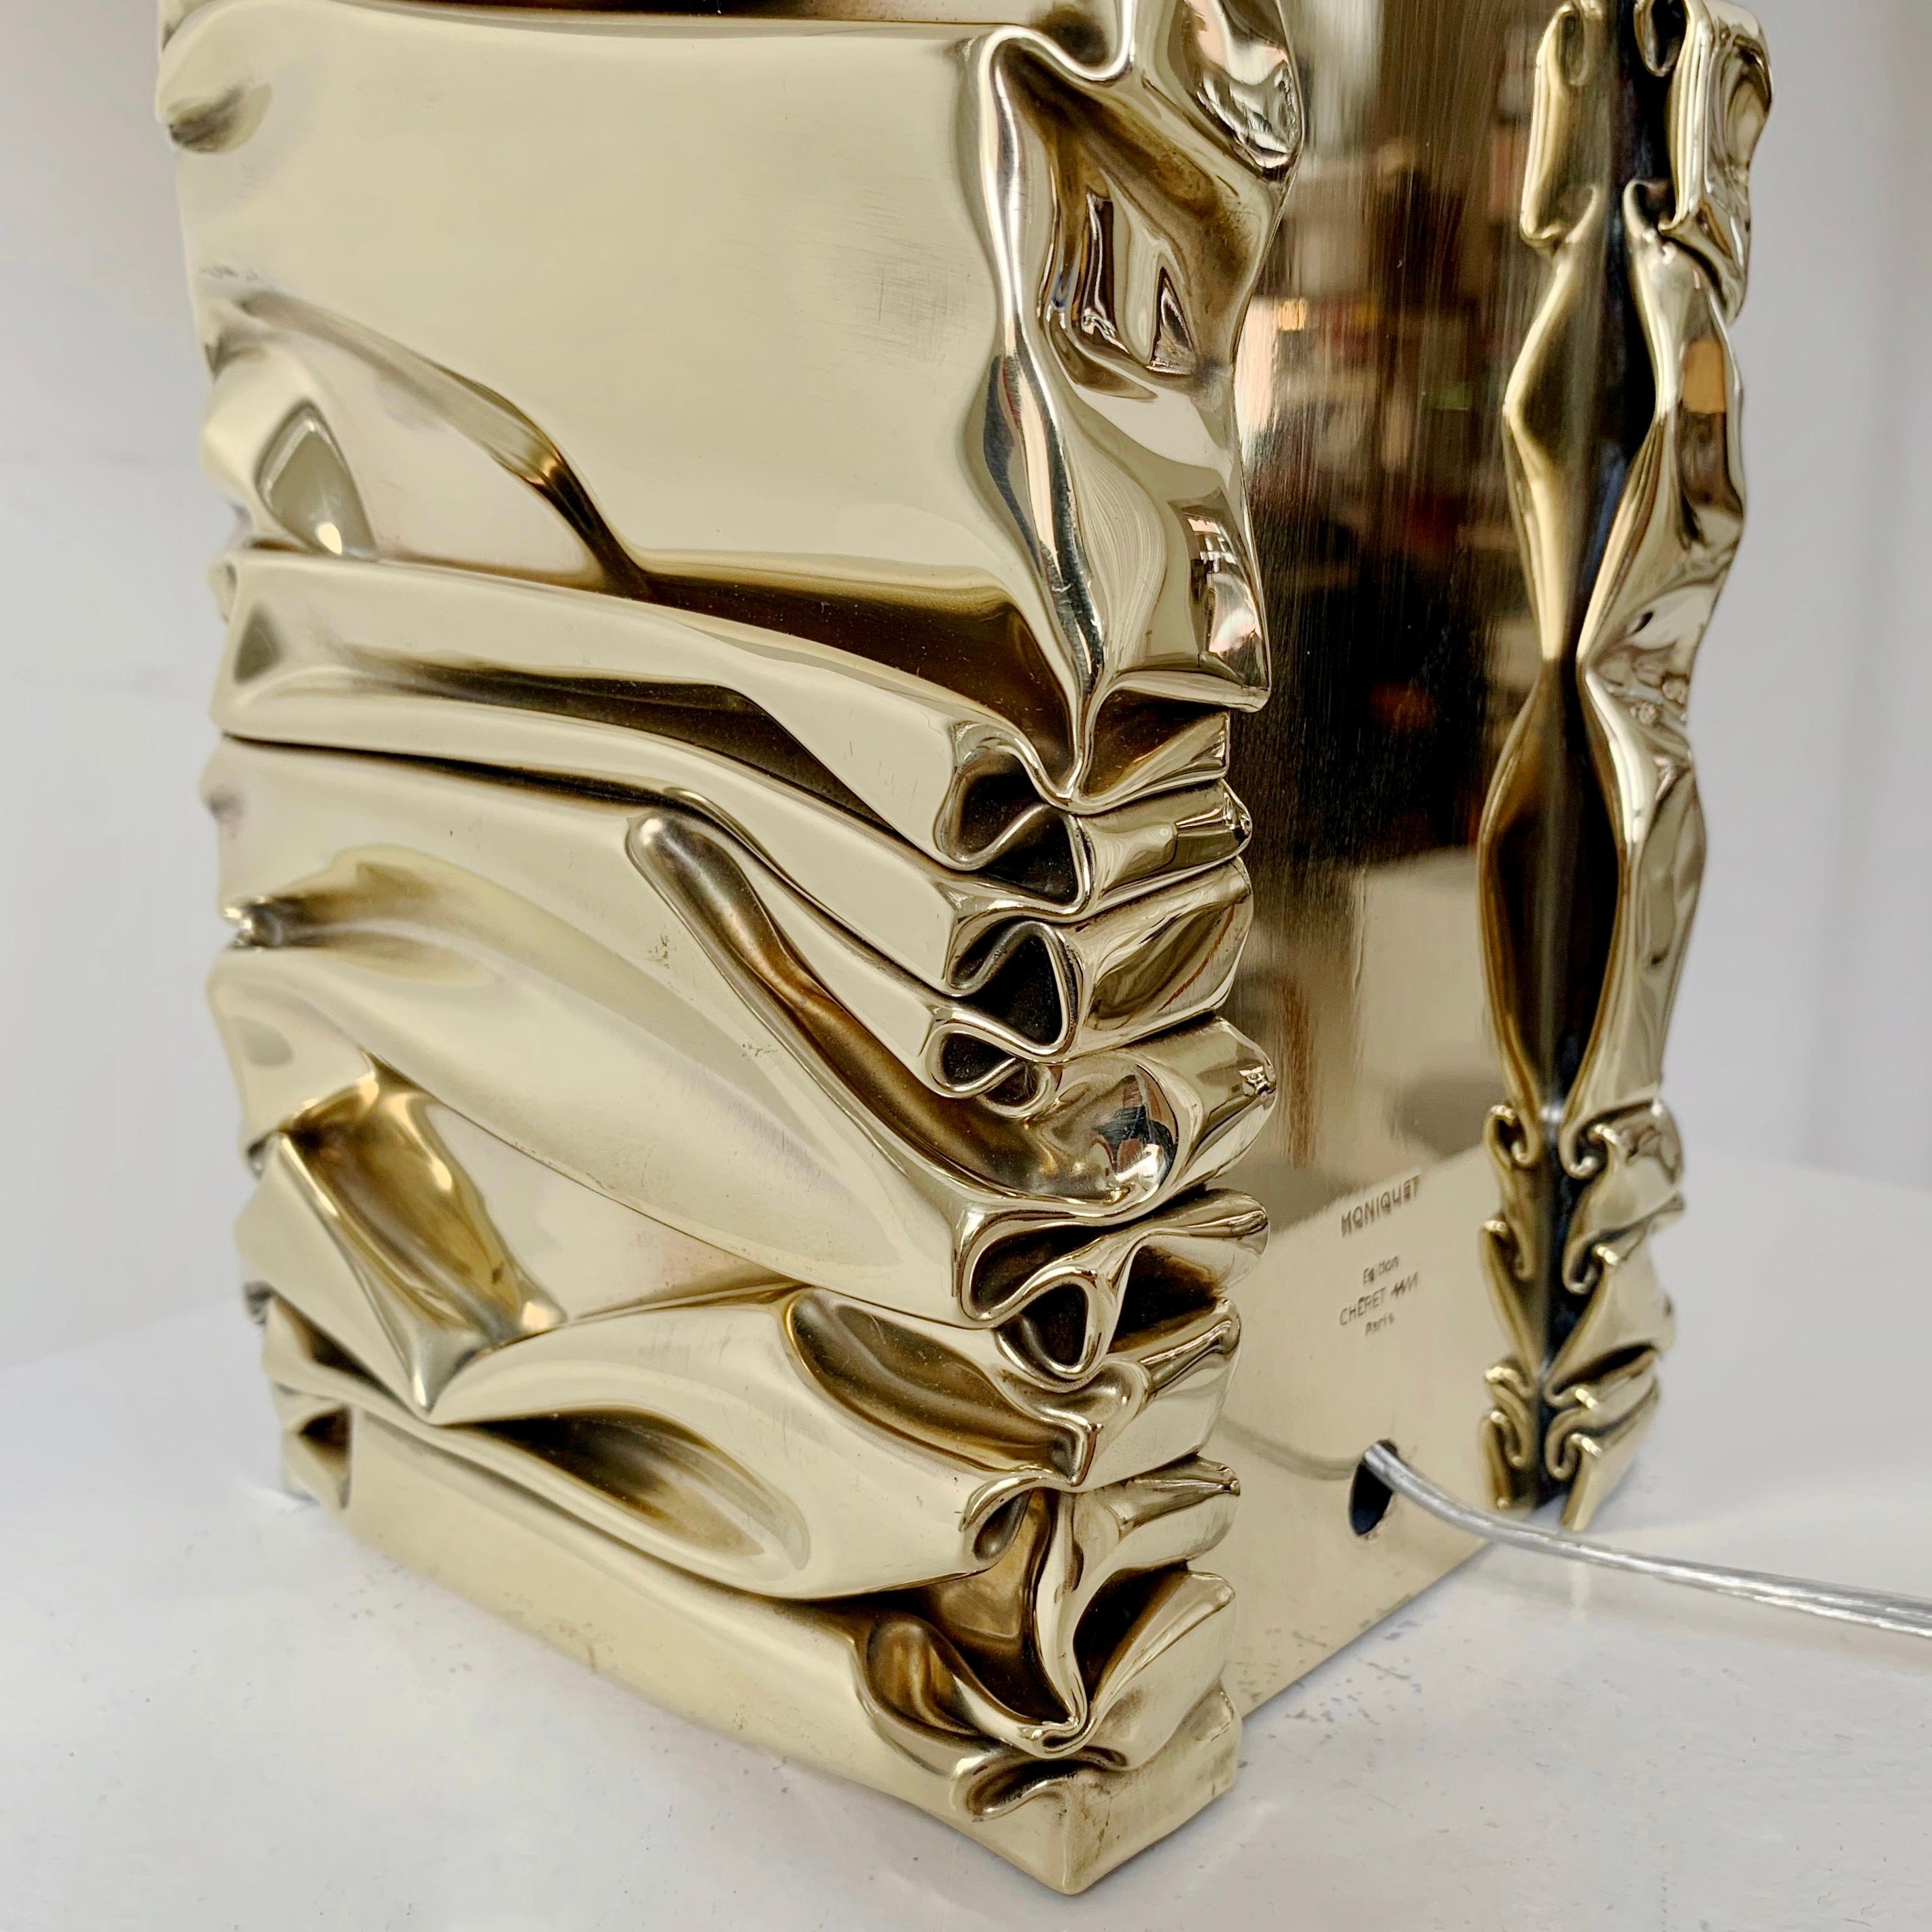 Jacques Moniquet Signed Brass Table Lamp, circa 1975, France. For Sale 4